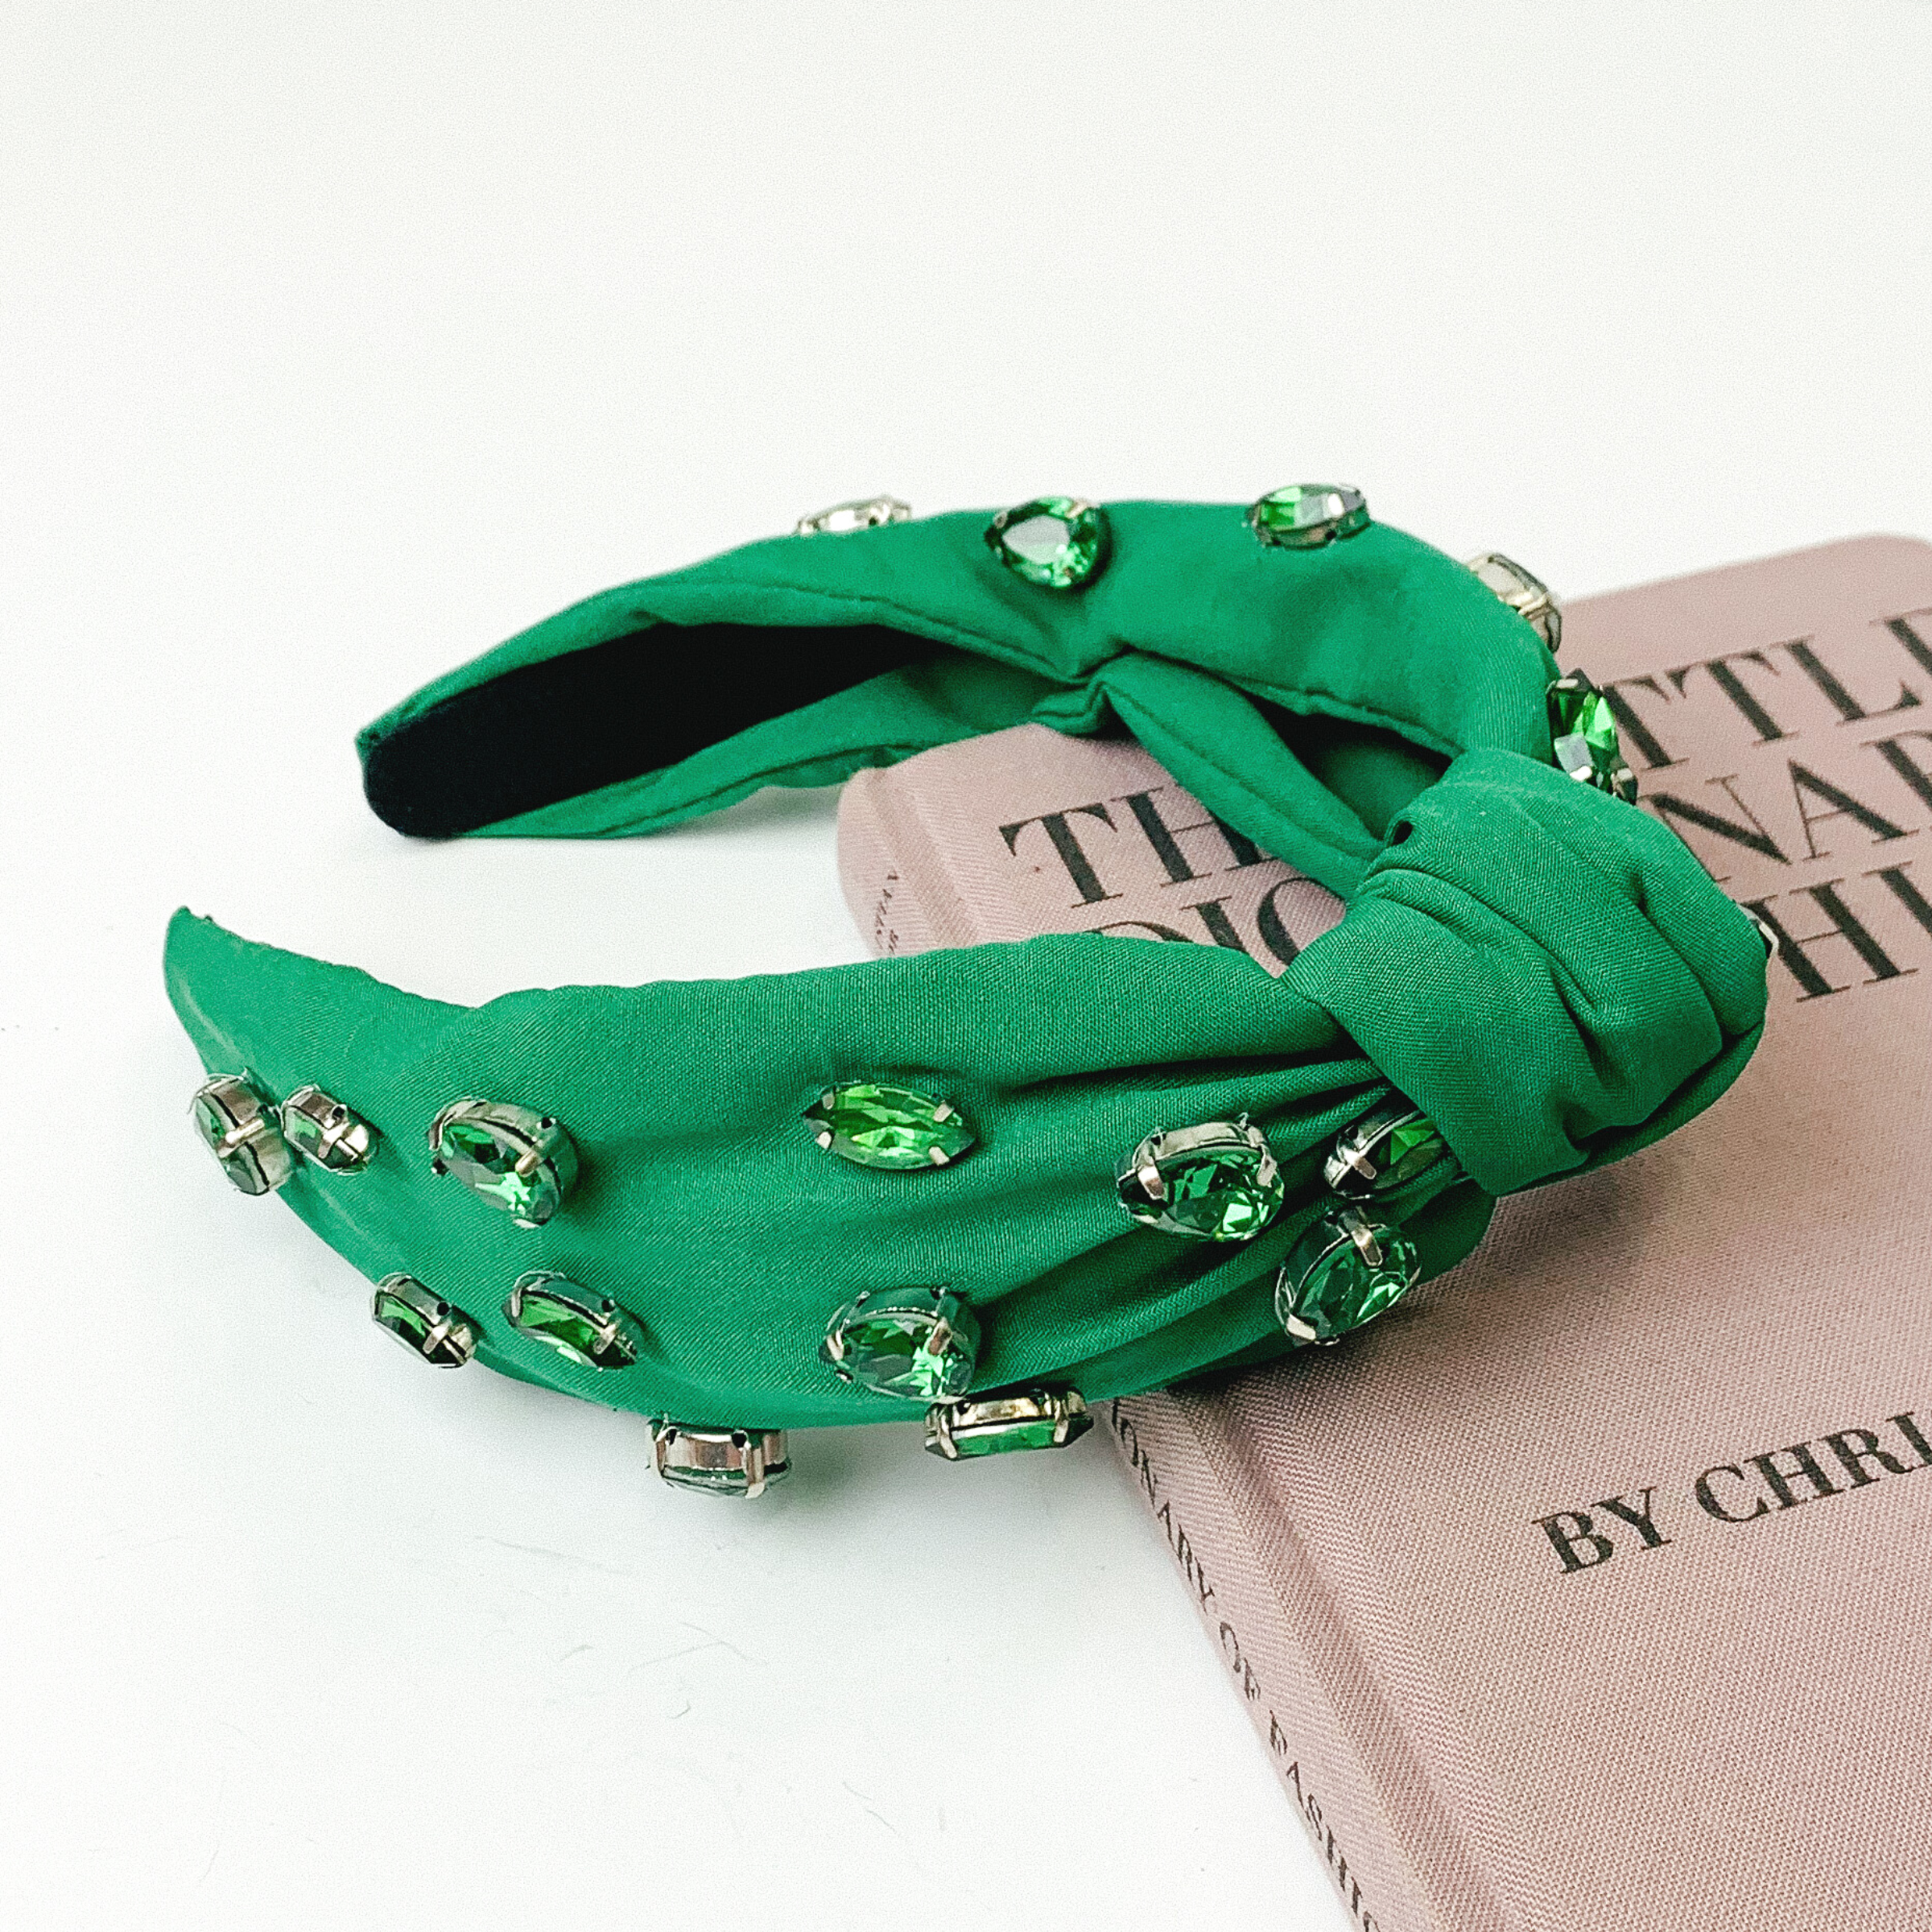 Green colored knot headband with different shaped green crystals. This headband is pictured partially laying on a mauve book on a white background.